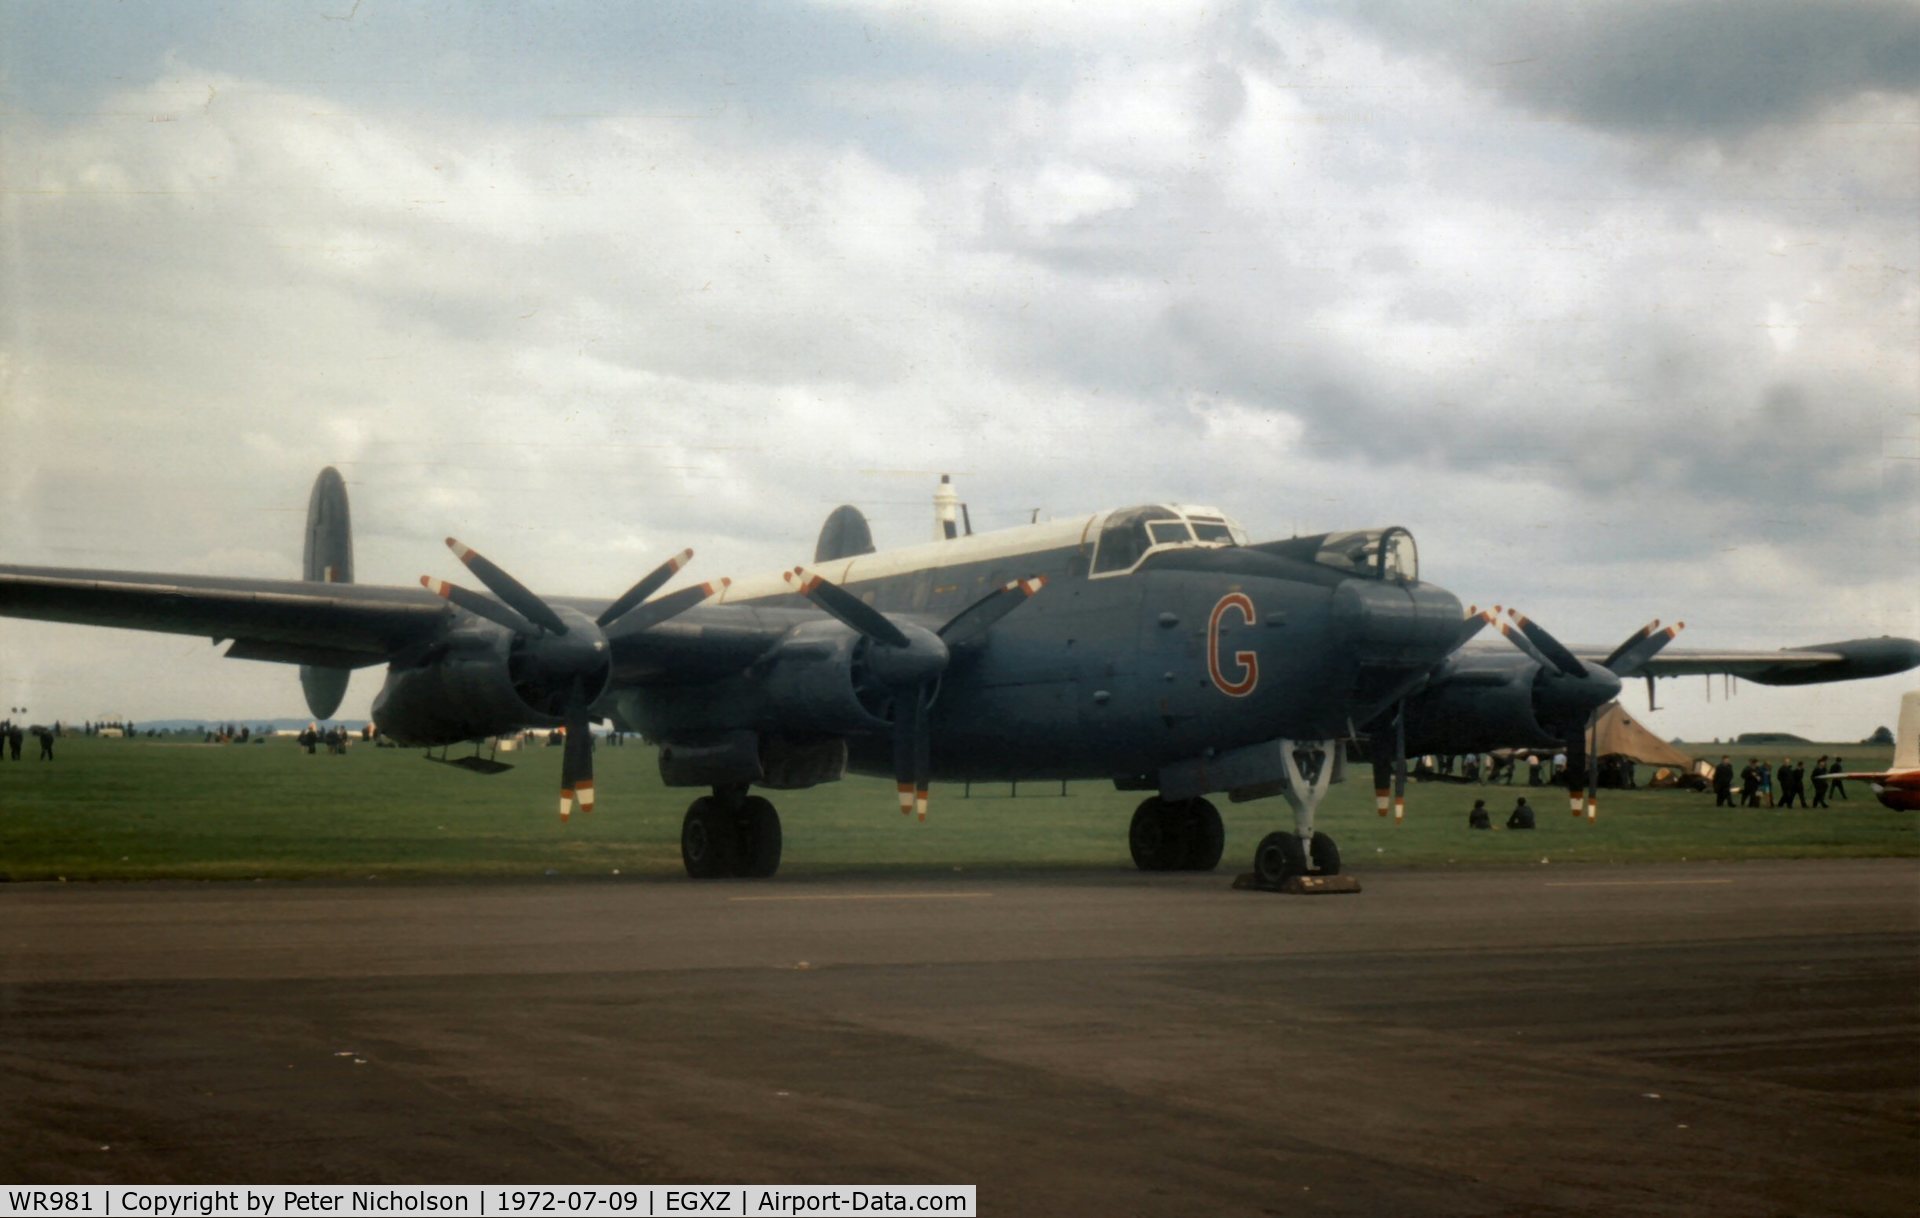 WR981, 1957 Avro 716 Shackleton MR.3/3 C/N Not found WR981, Shackleton MR.3/3 in the static display at the 1972 Topcliffe Open Day.